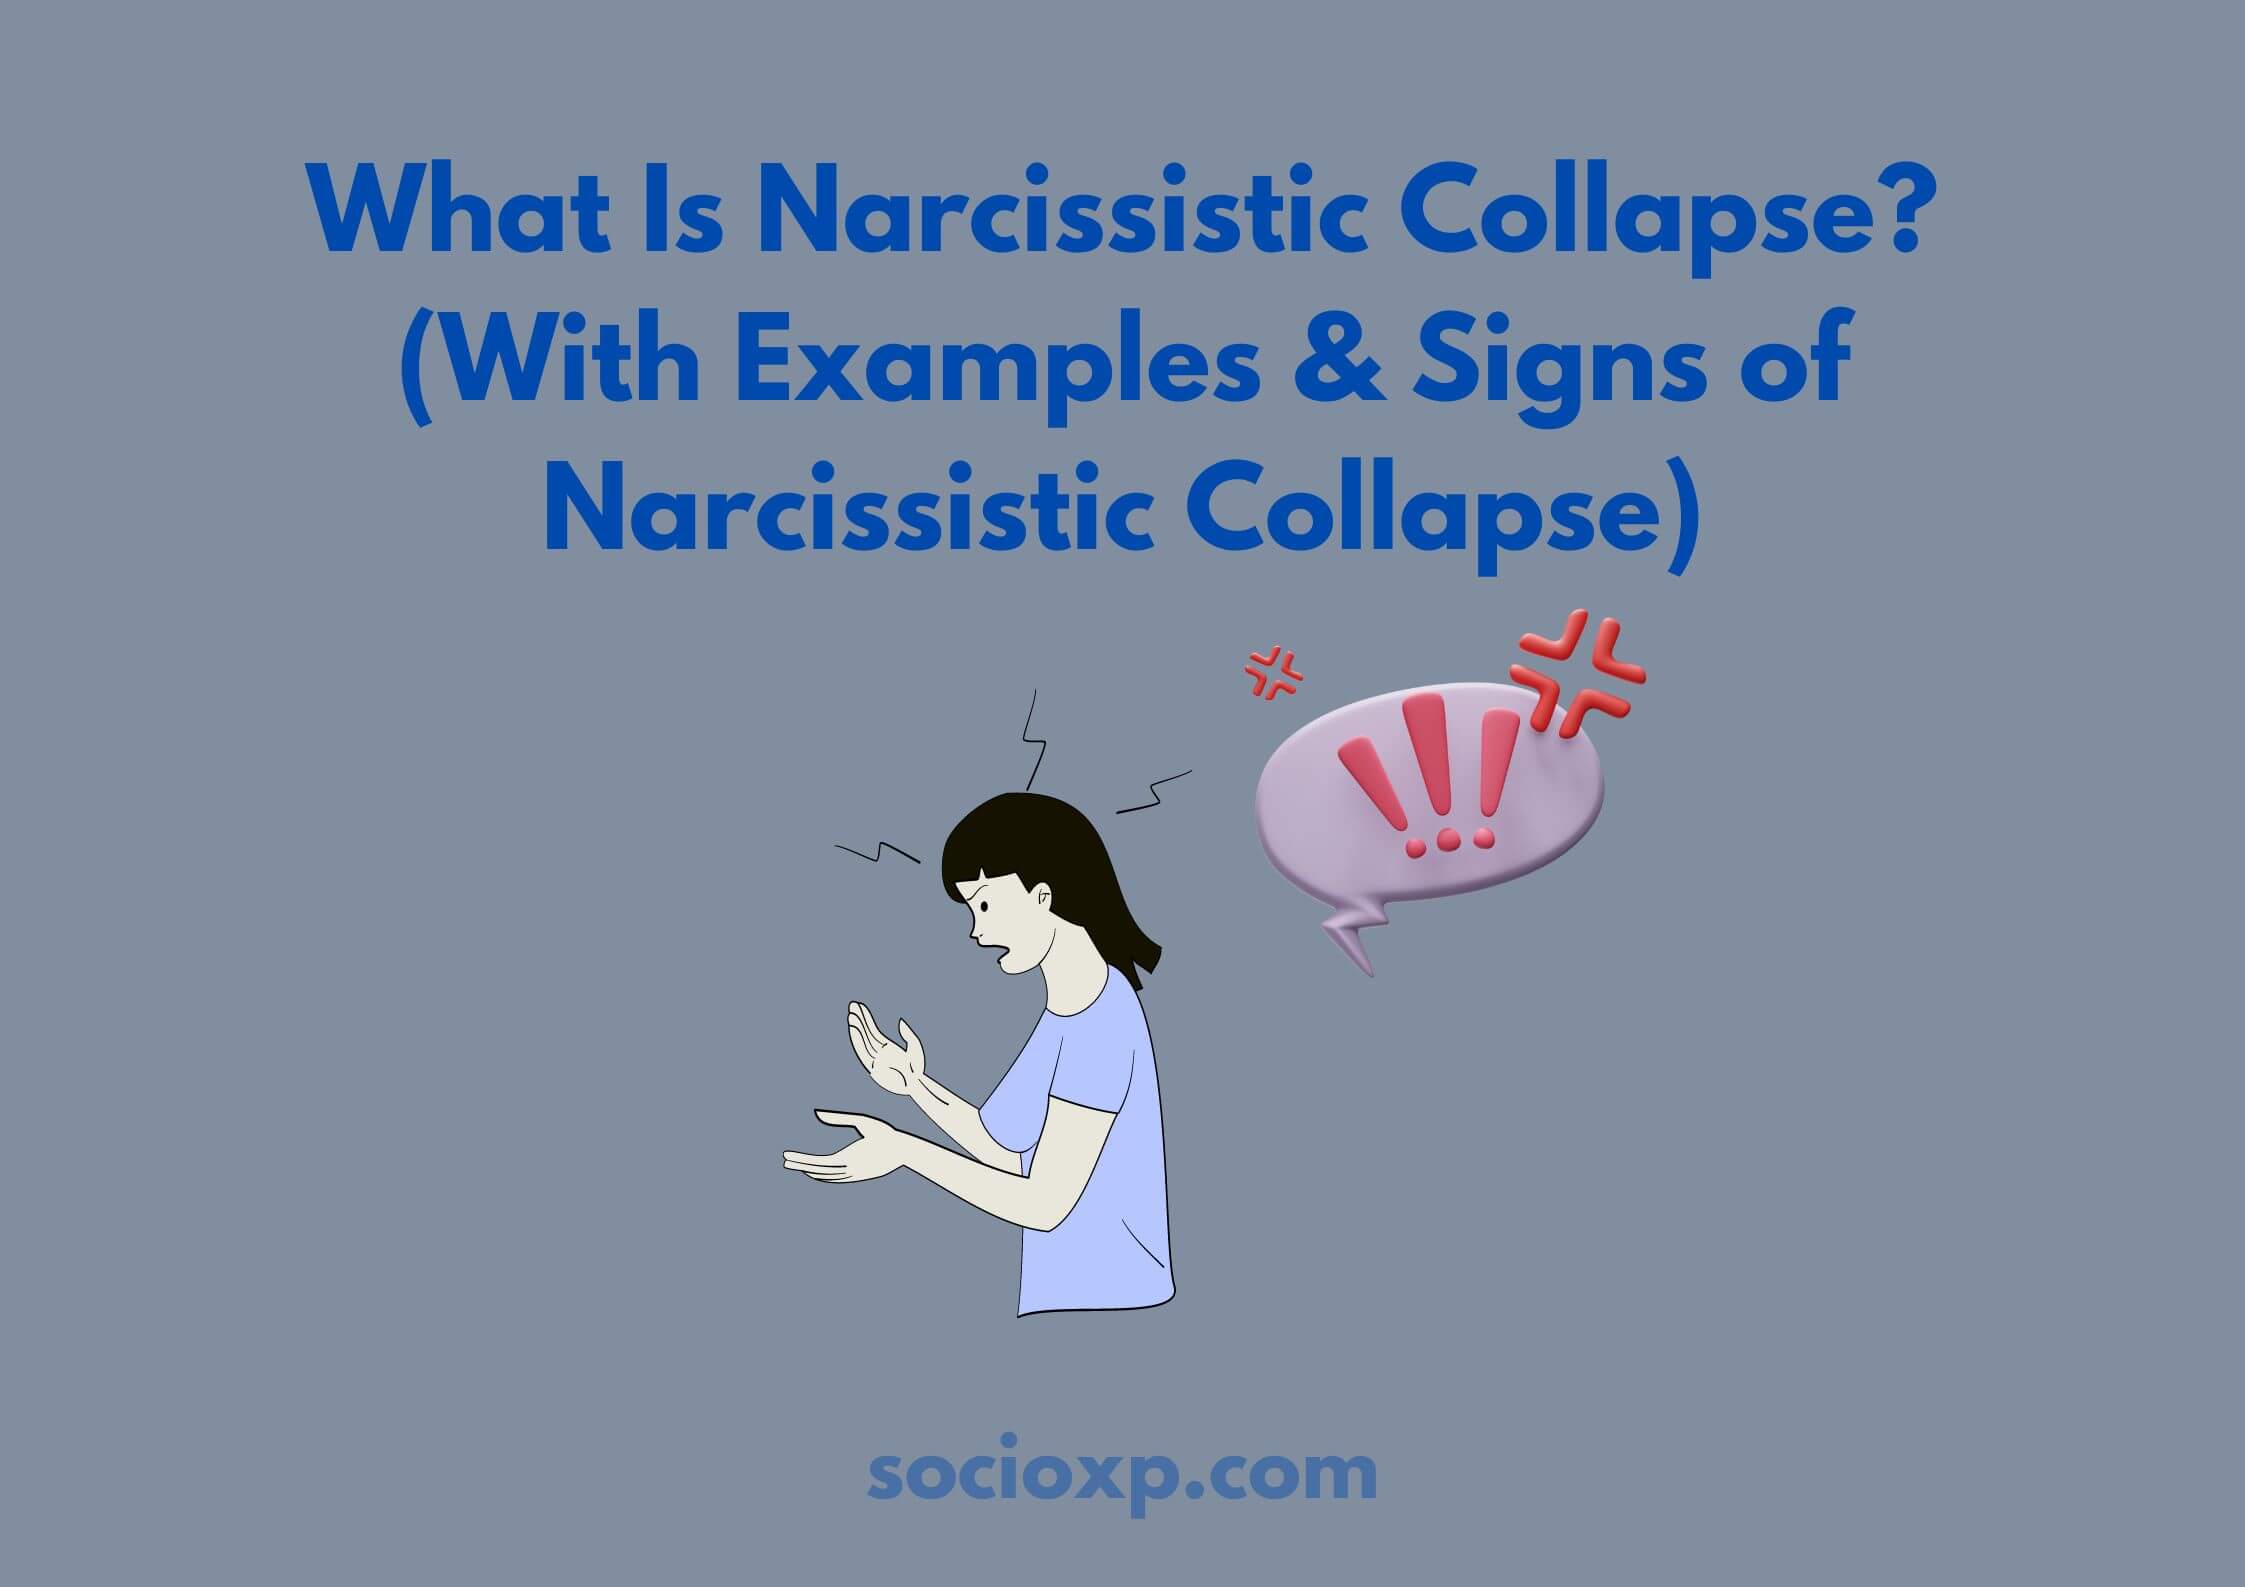 What Is Narcissistic Collapse? (With Examples & Signs of Narcissistic Collapse)